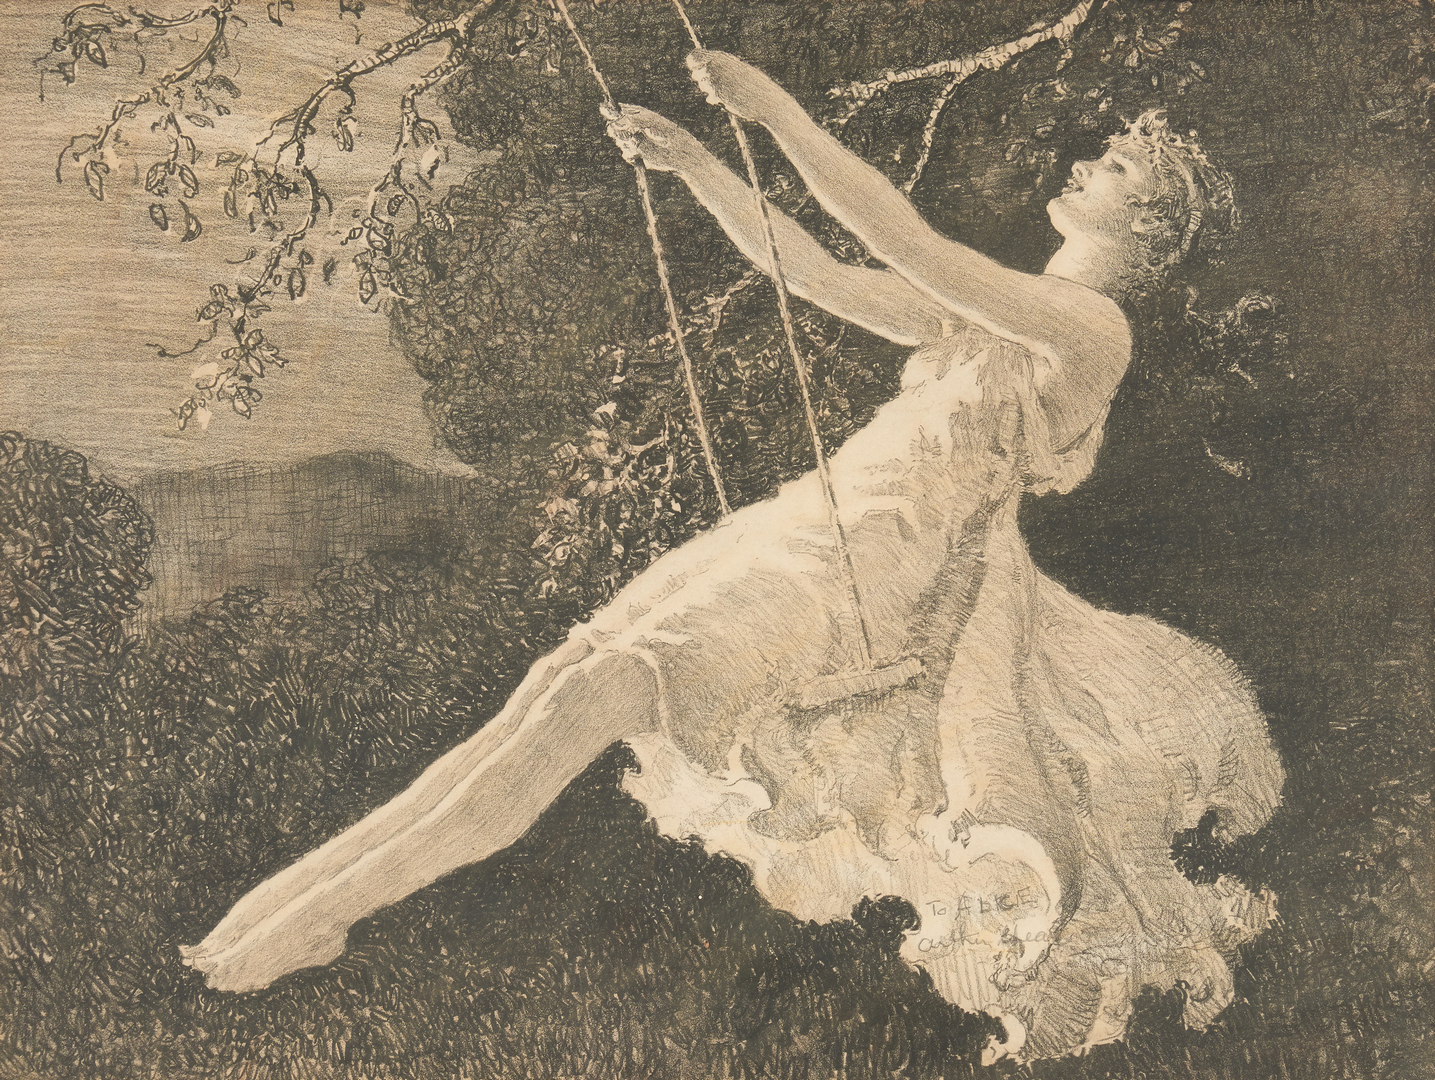 Lot 663: 2 Arthur Spear Figural Prints, "Sunrise" and "The Swing"